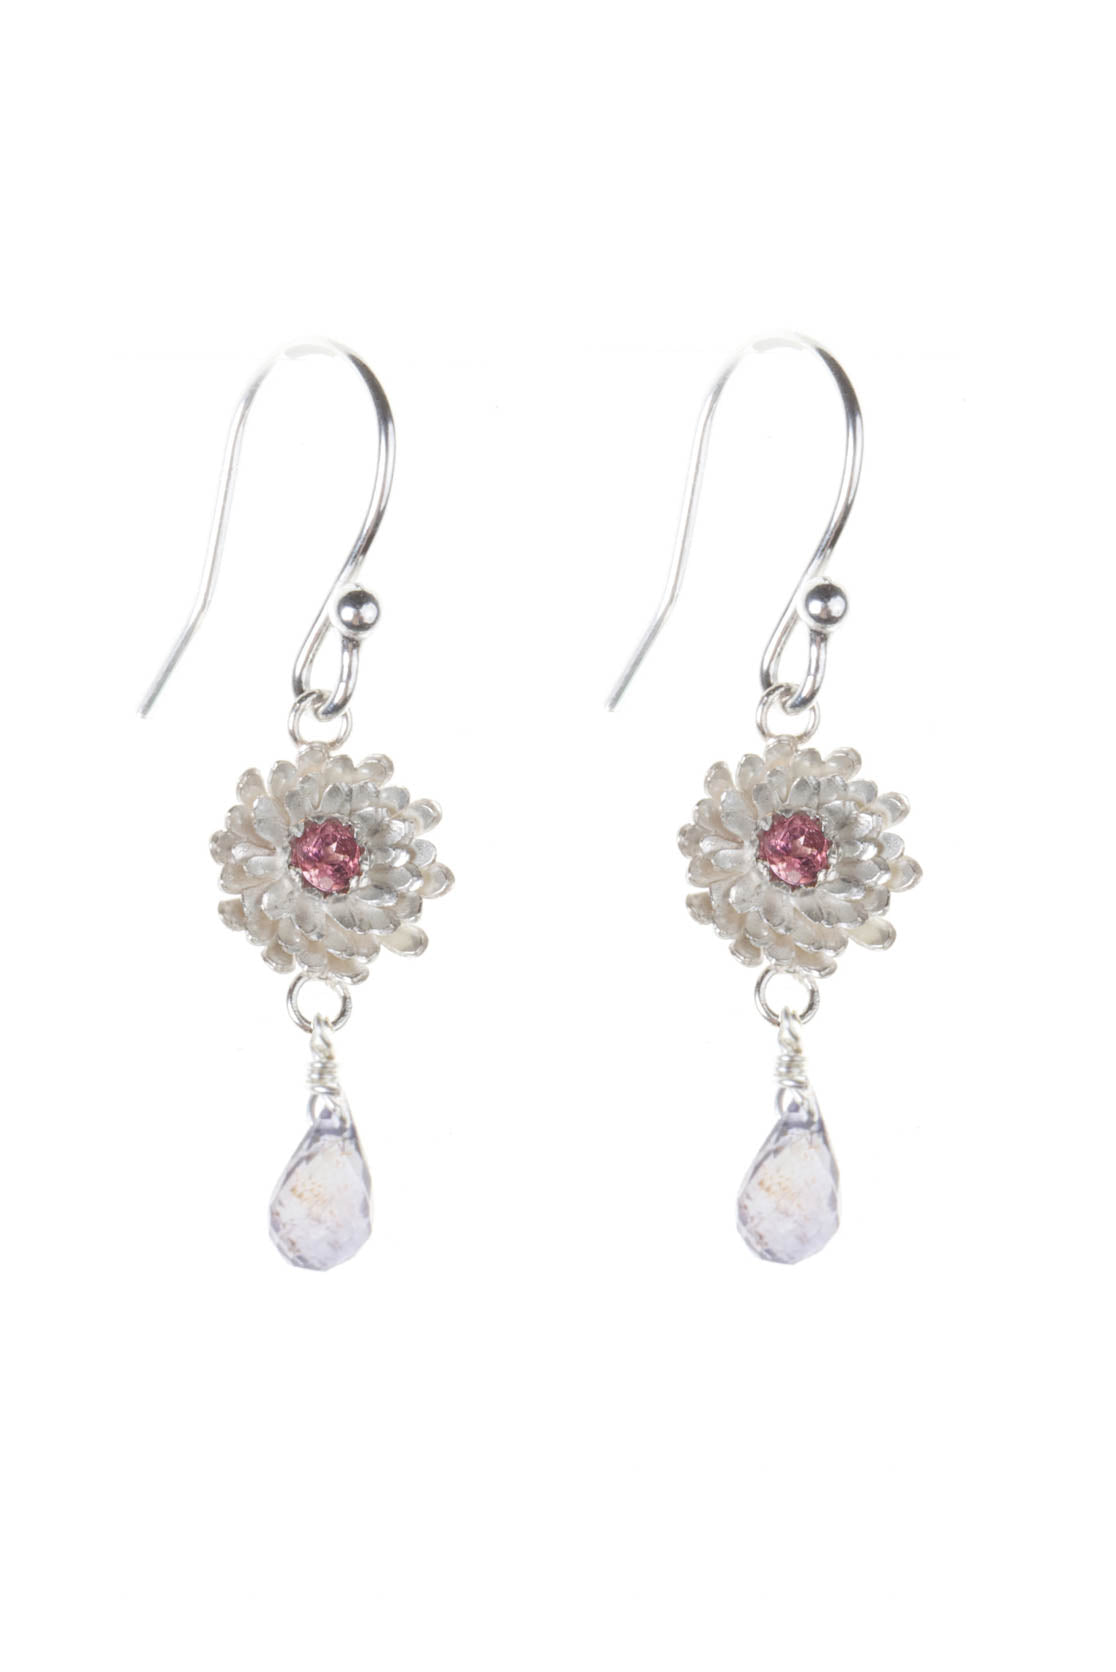 dahlia drop earrings with sterling silver flower and white stone